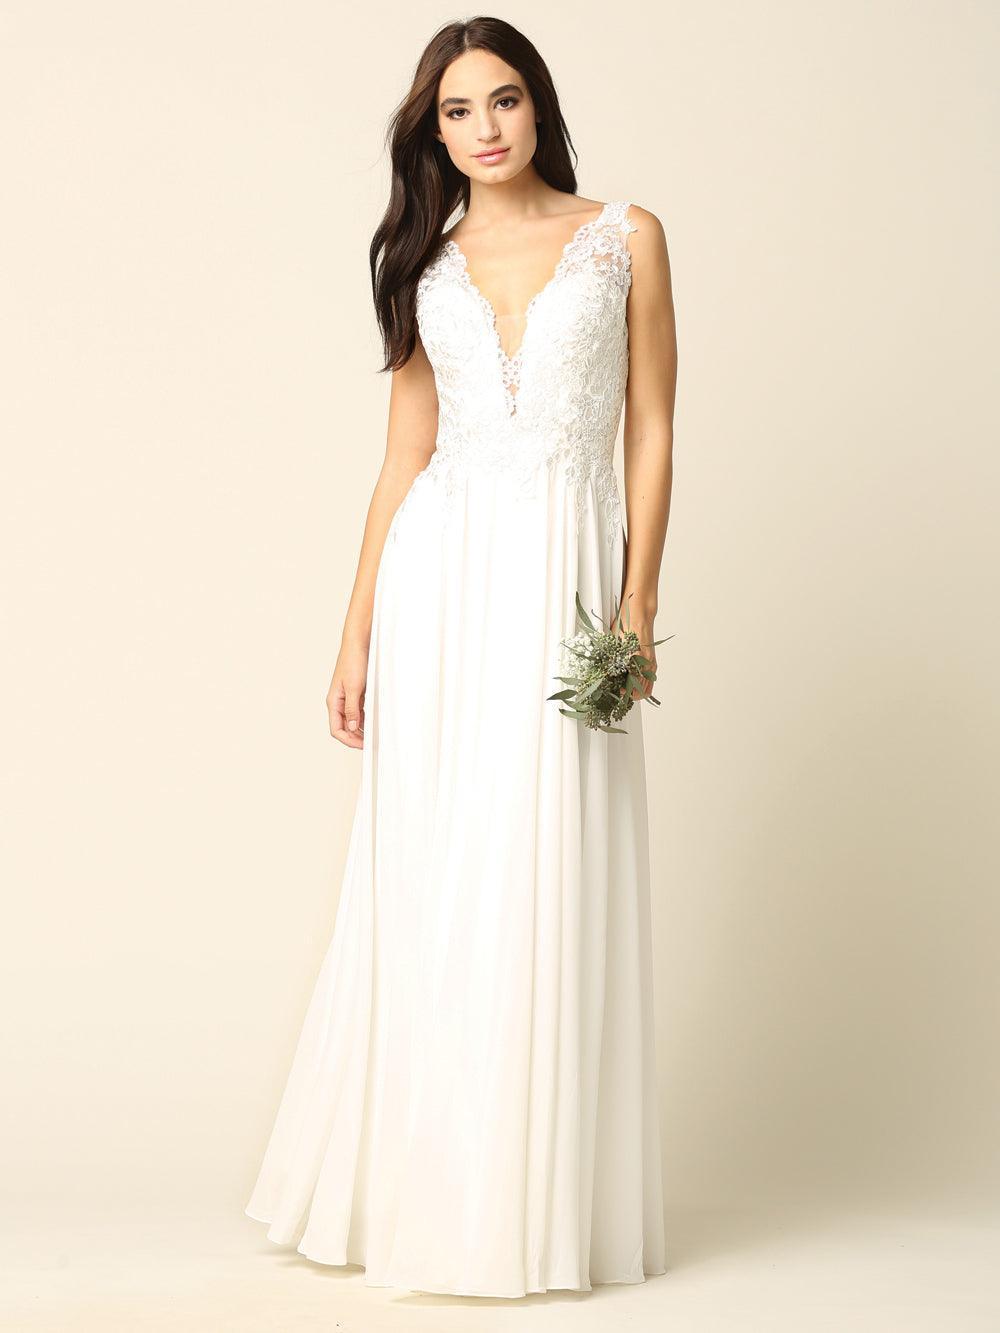 Long Sleeveless Lace Chiffon Wedding Gown Sale - The Dress Outlet